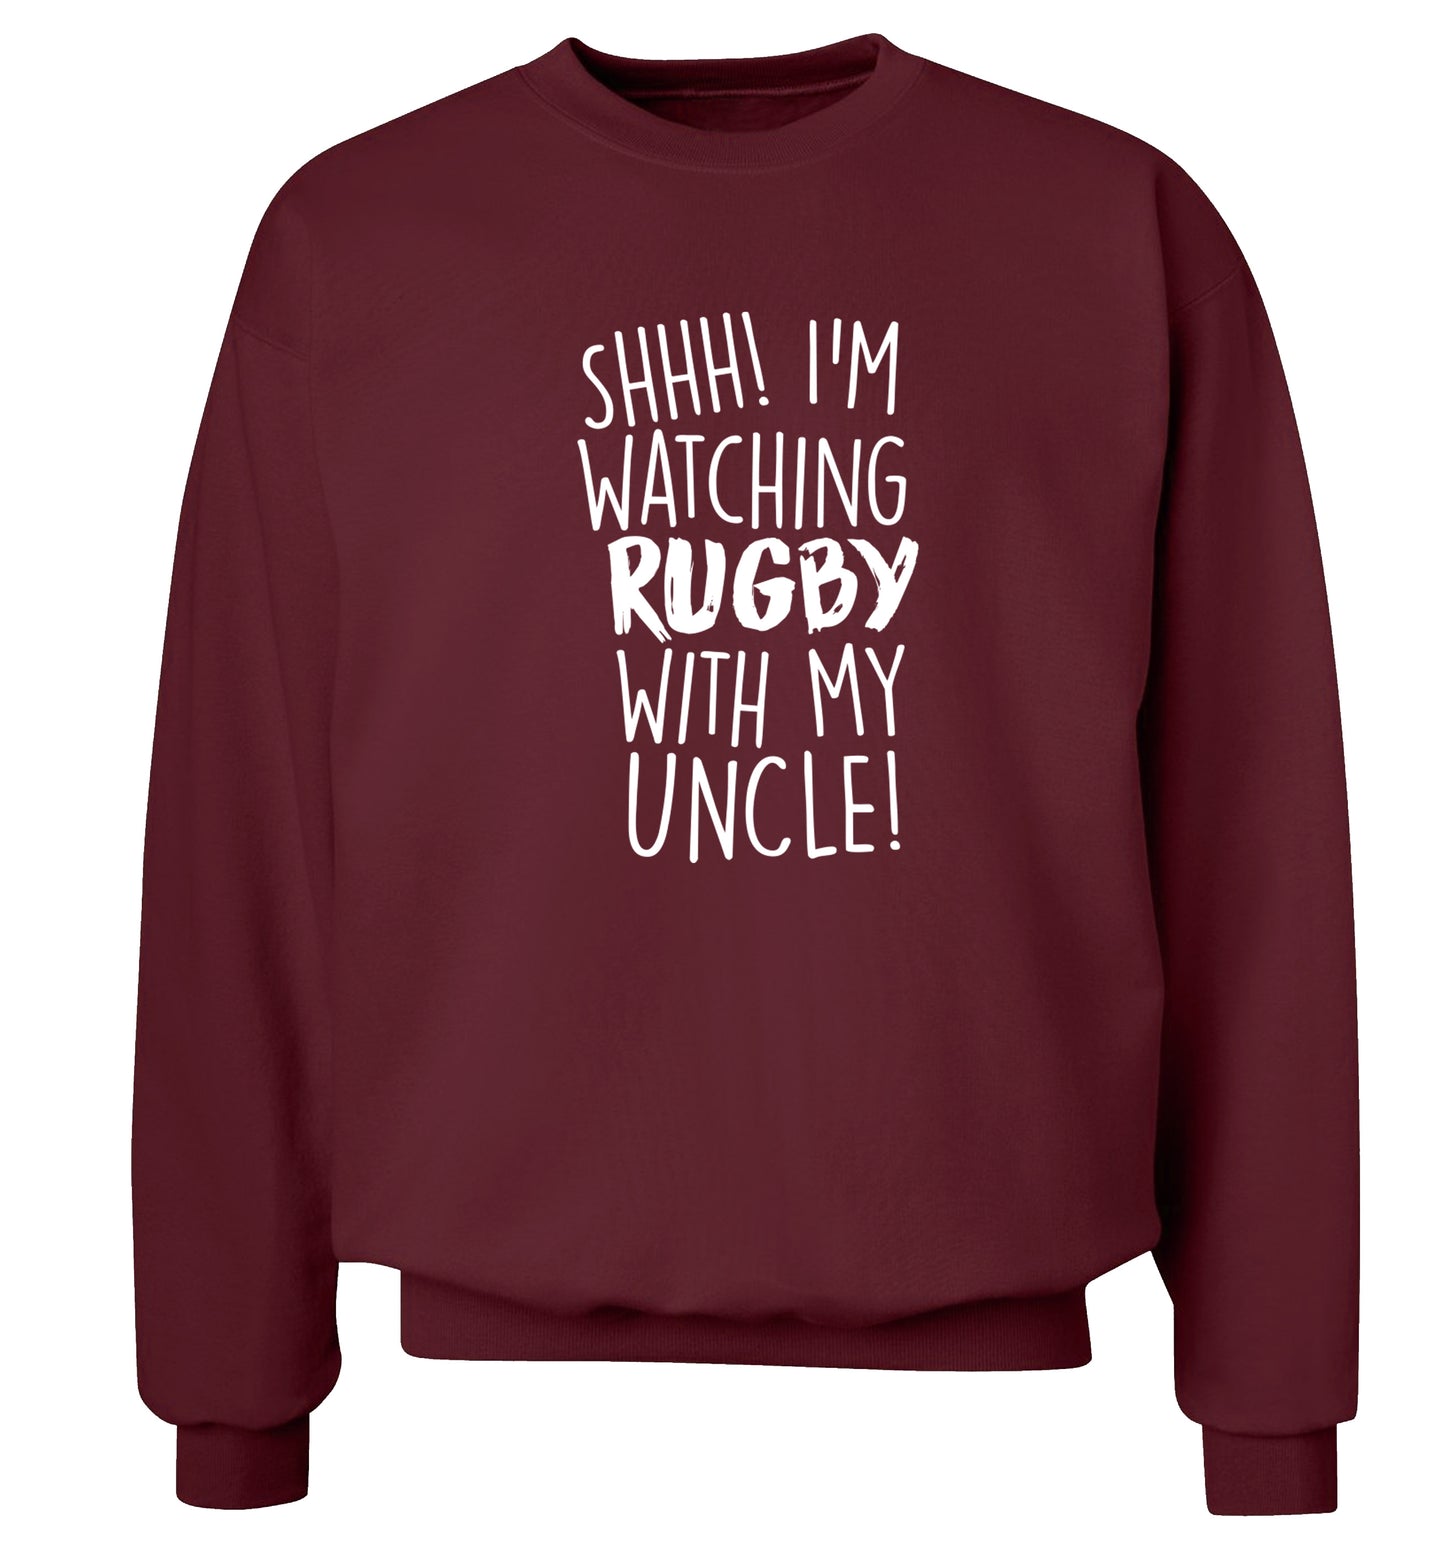 Shh.. I'm watching rugby with my uncle Adult's unisex maroon Sweater 2XL